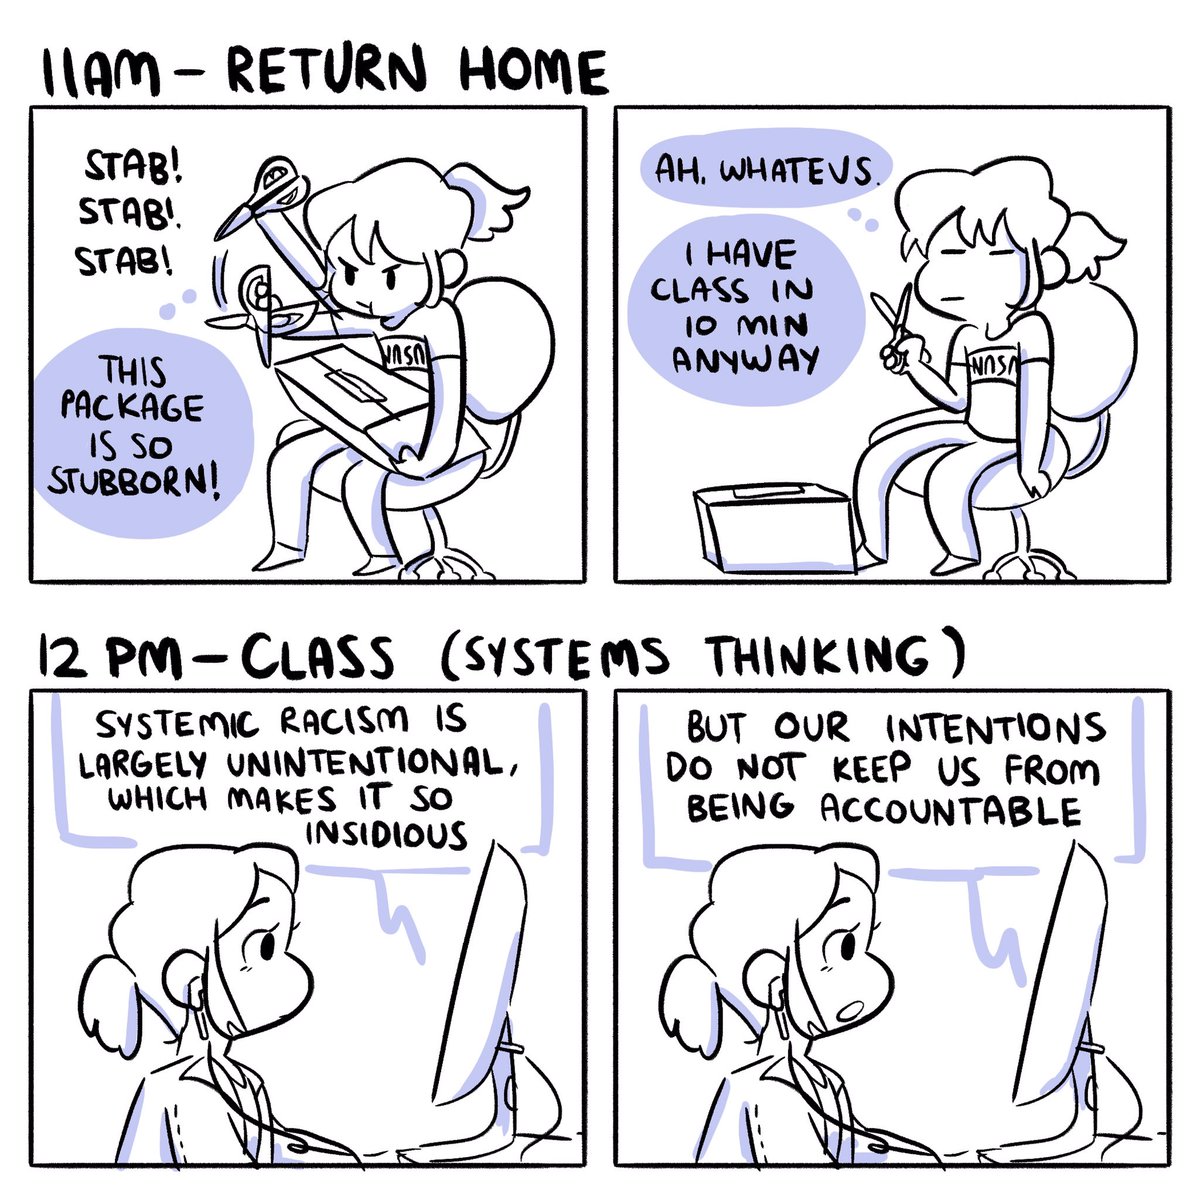 Happy Hourly Comic day! (1/2) #hourlycomicday2021 